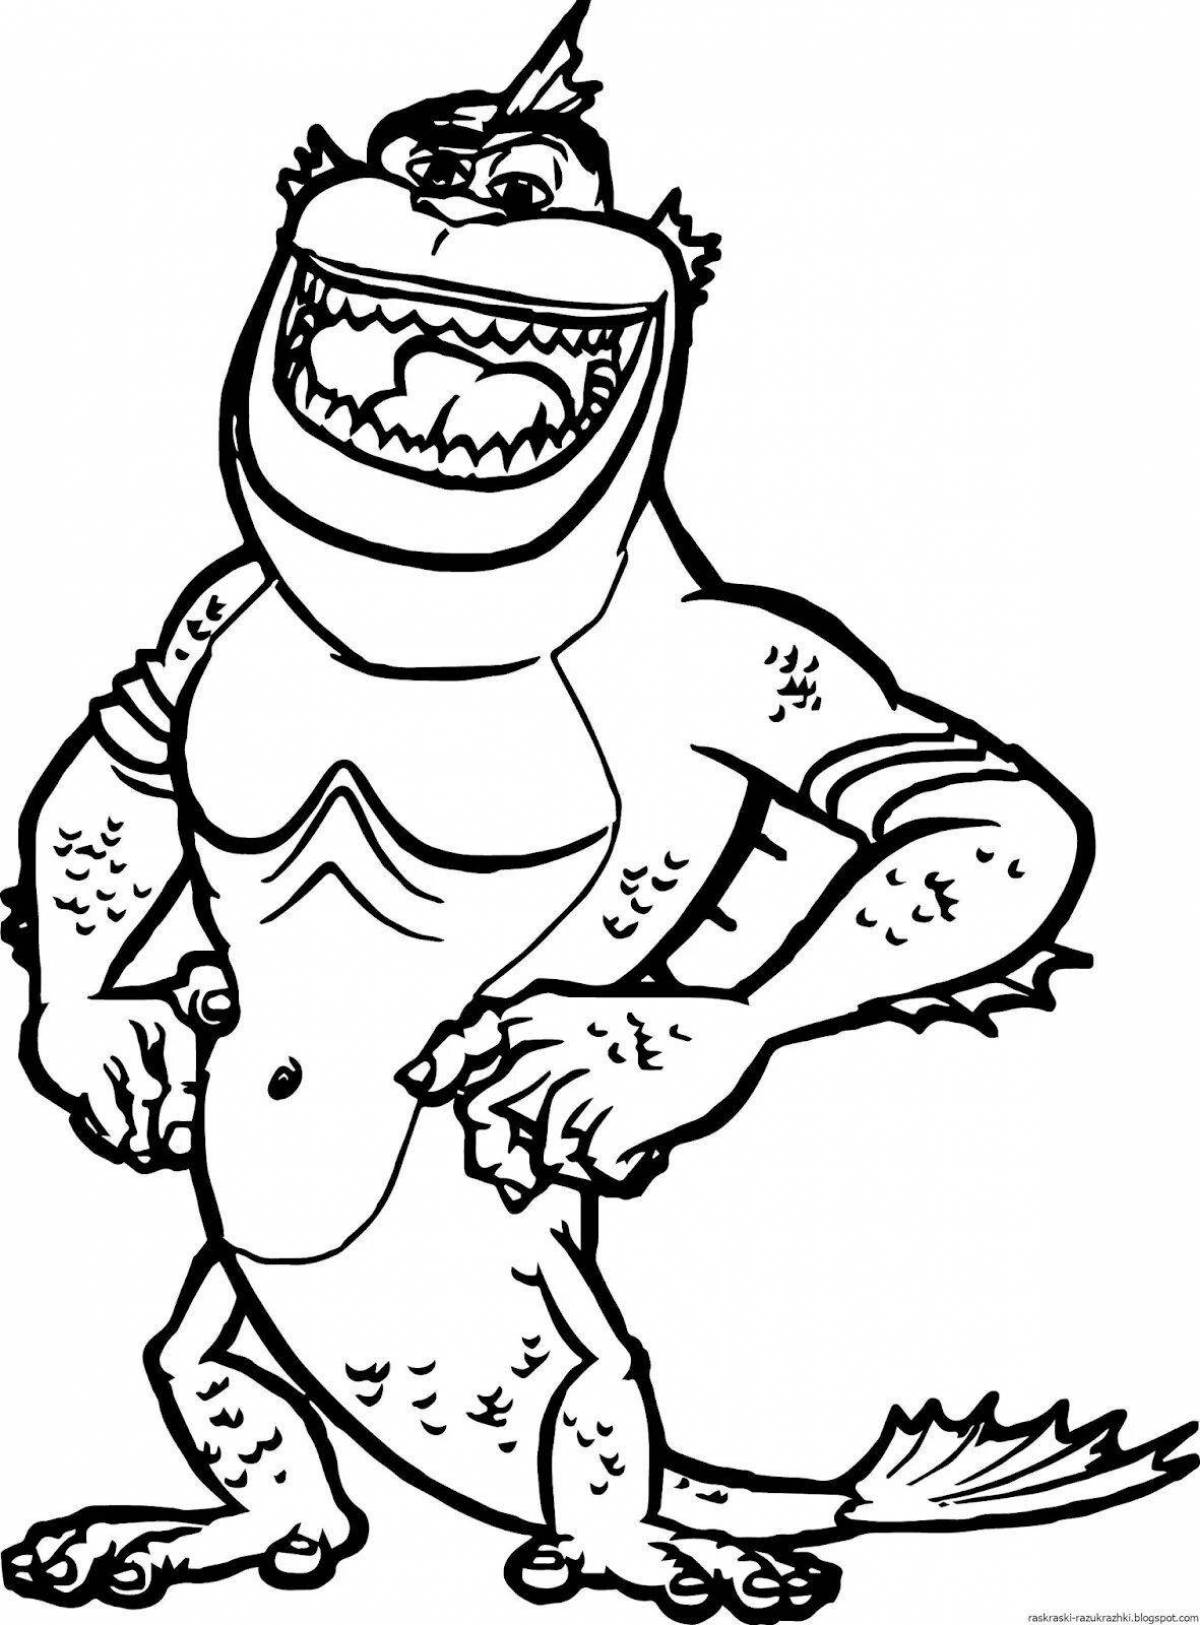 Colorful monsters coloring pages for children 6-7 years old